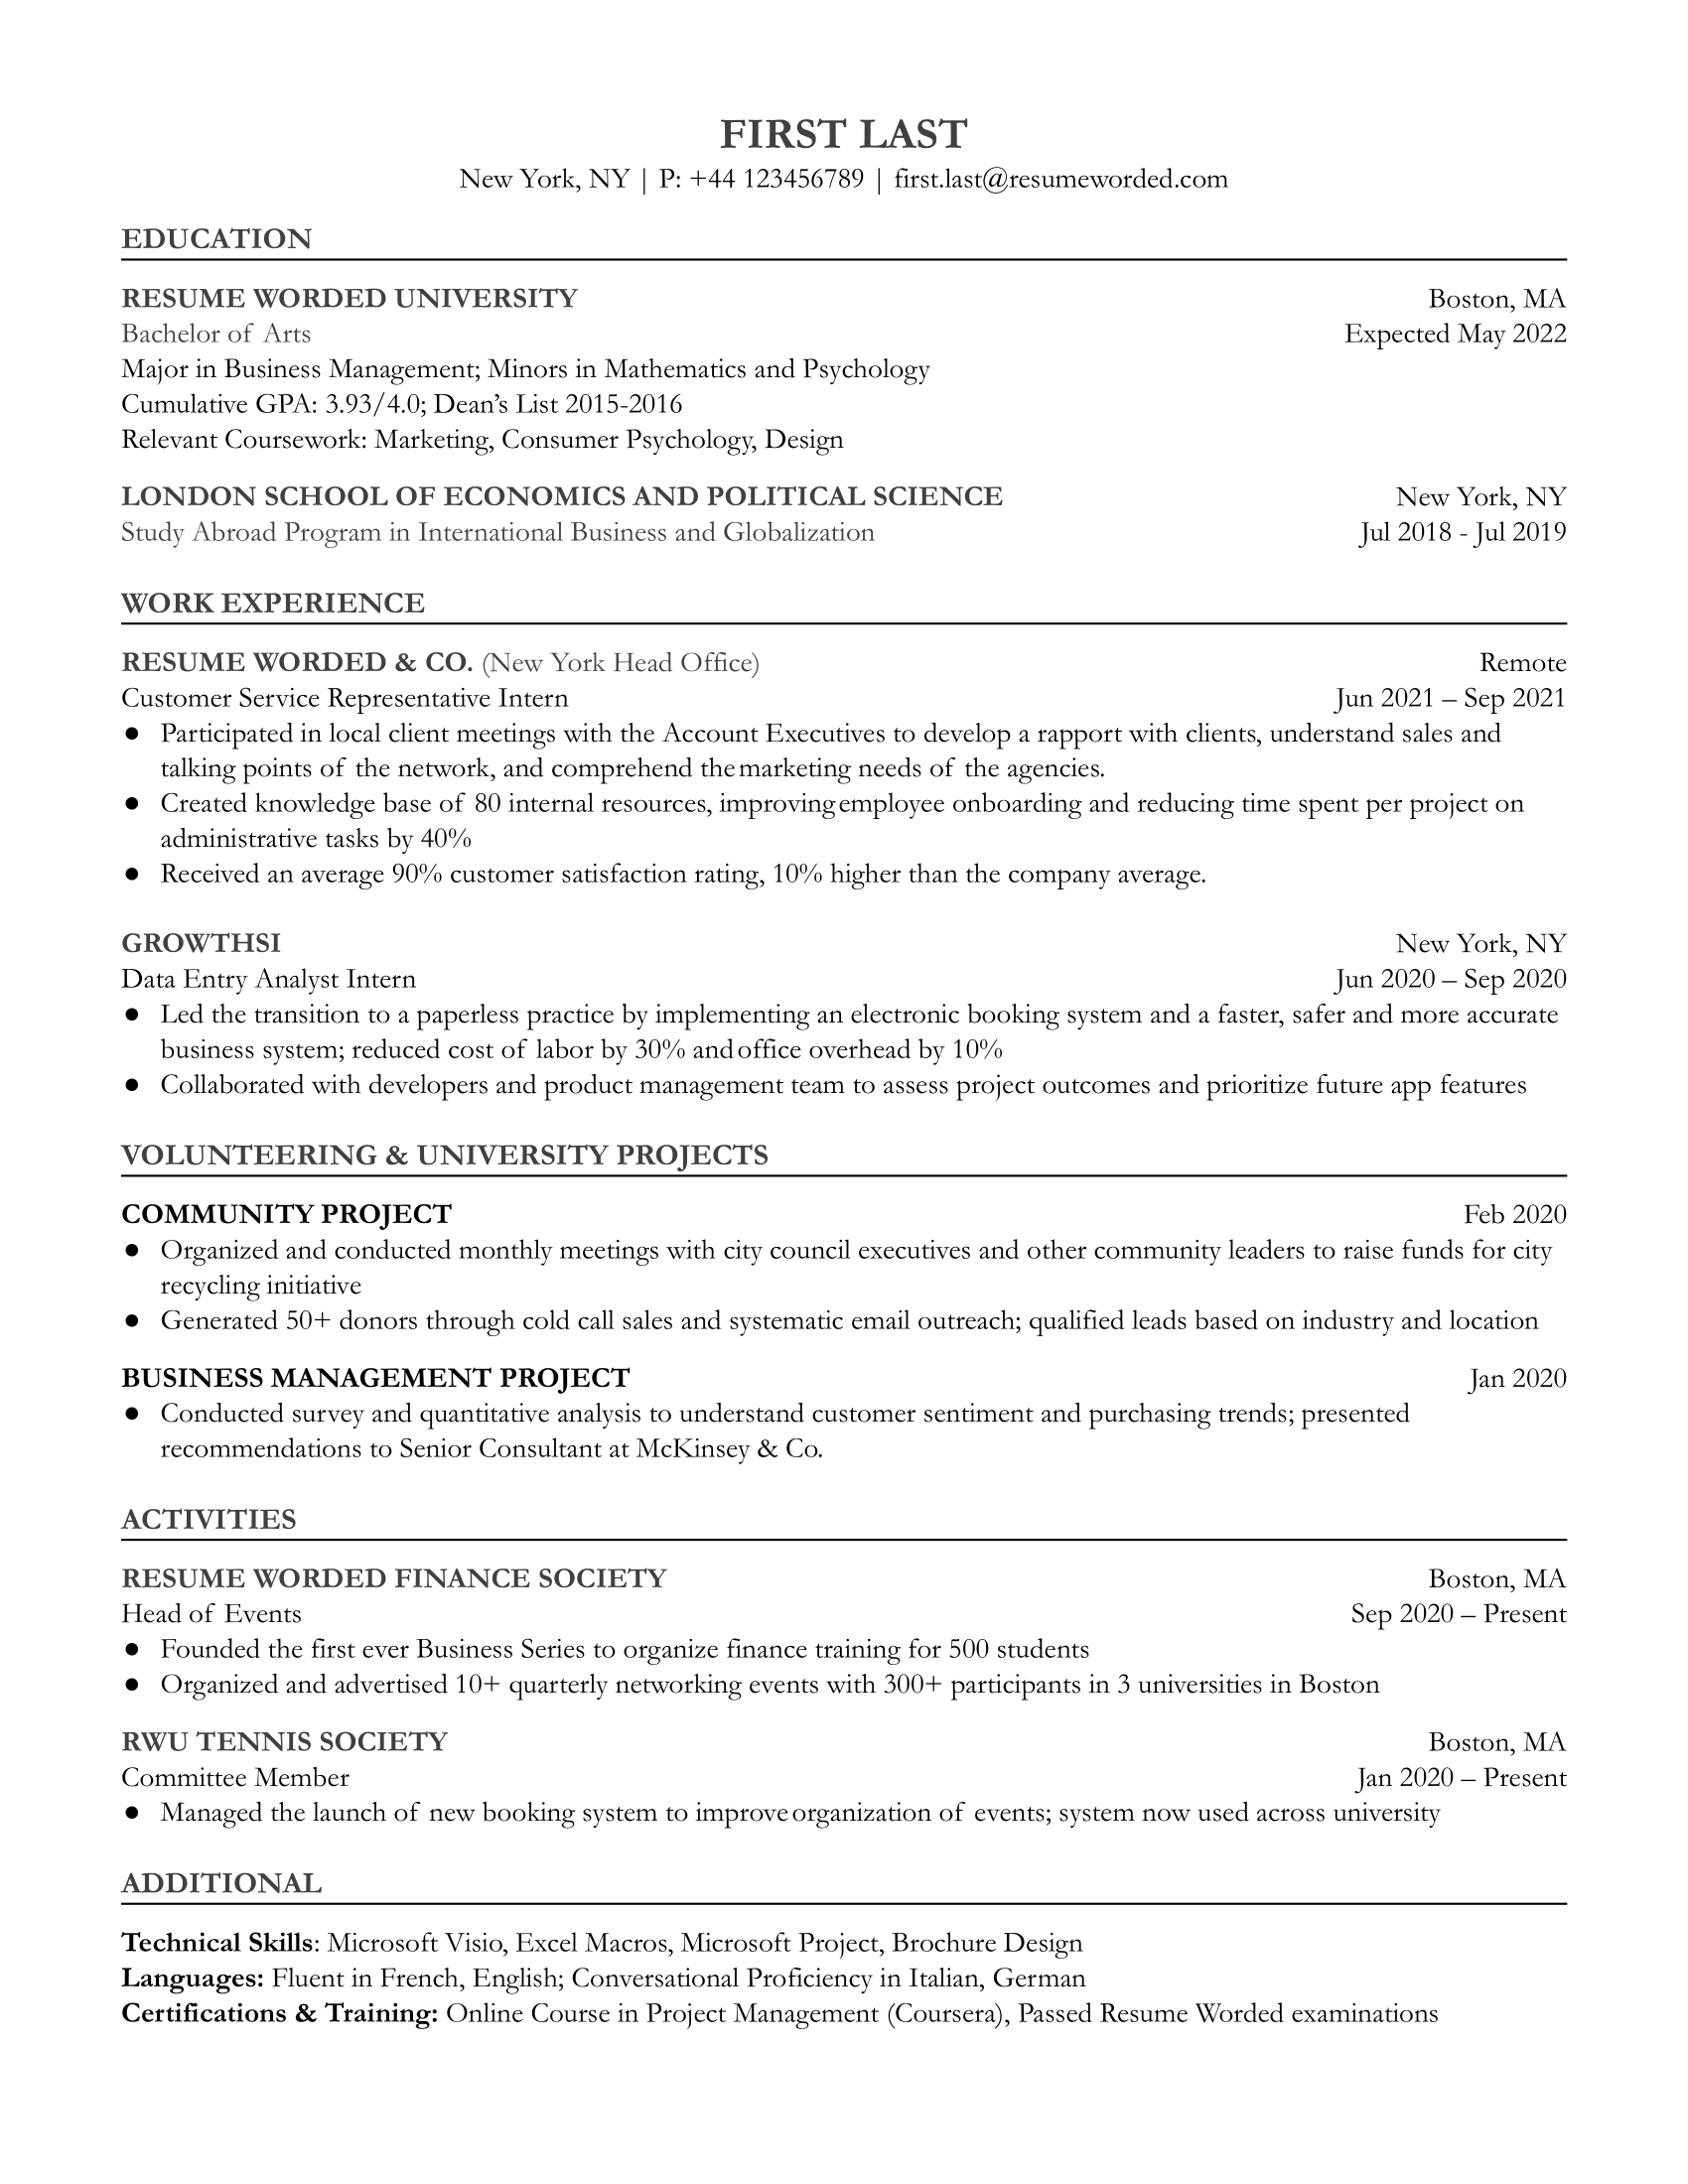 A CV showing skills and experiences relevant to an entry-level customer service representative role.